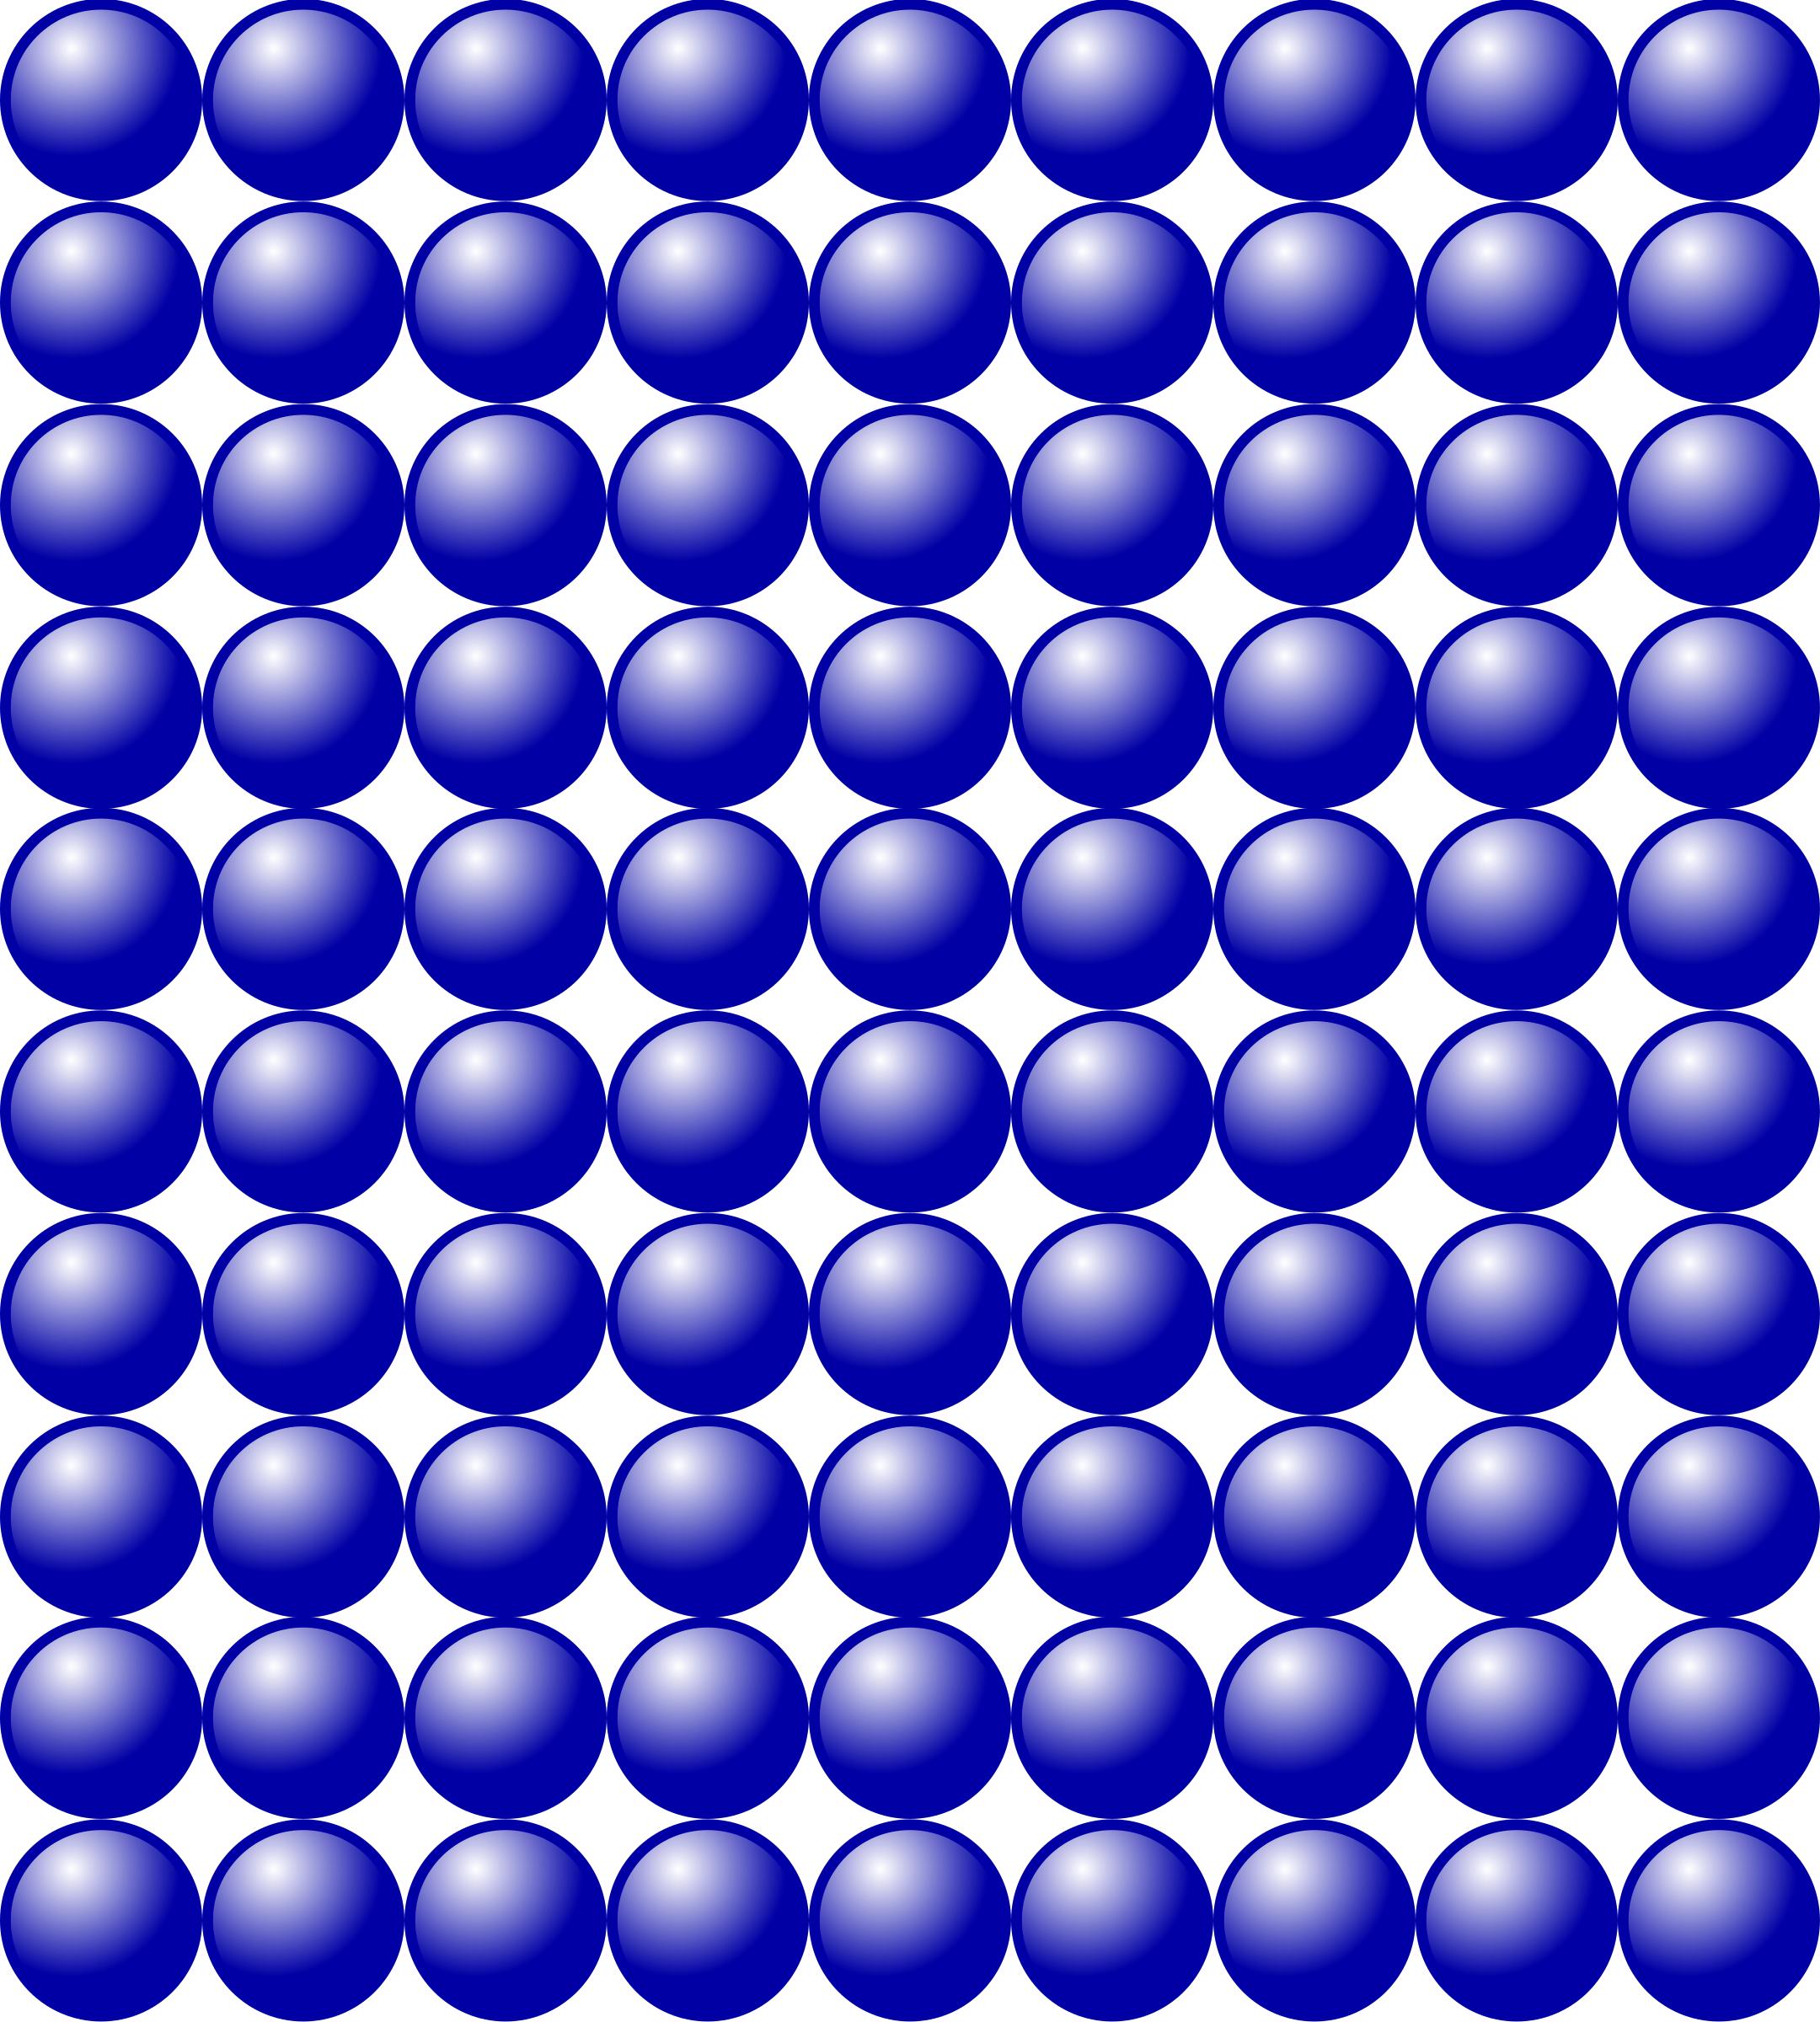 Beads quantitative picture for multiplication 10x9 png